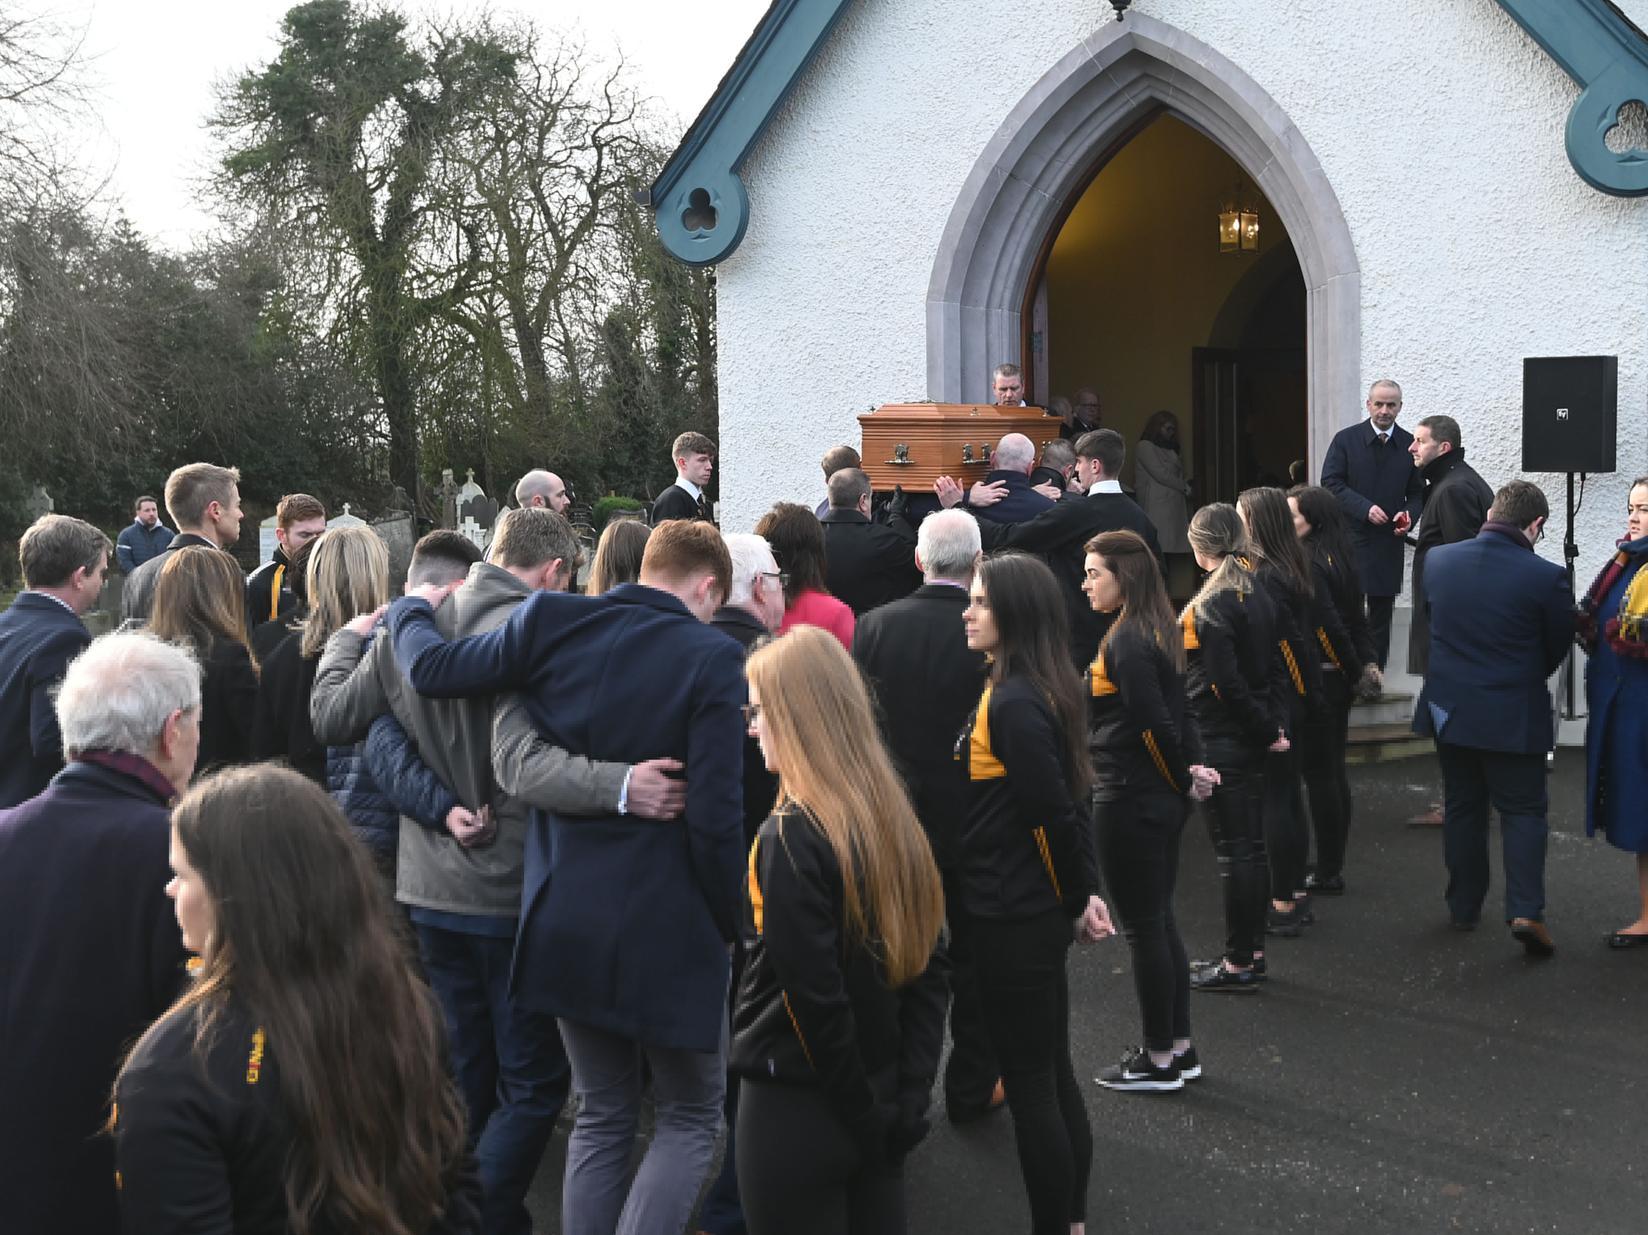 Mourners make their way into the chapel for the Requiem Mass of former SDLP Deputy Leader, Seamus Mallon.